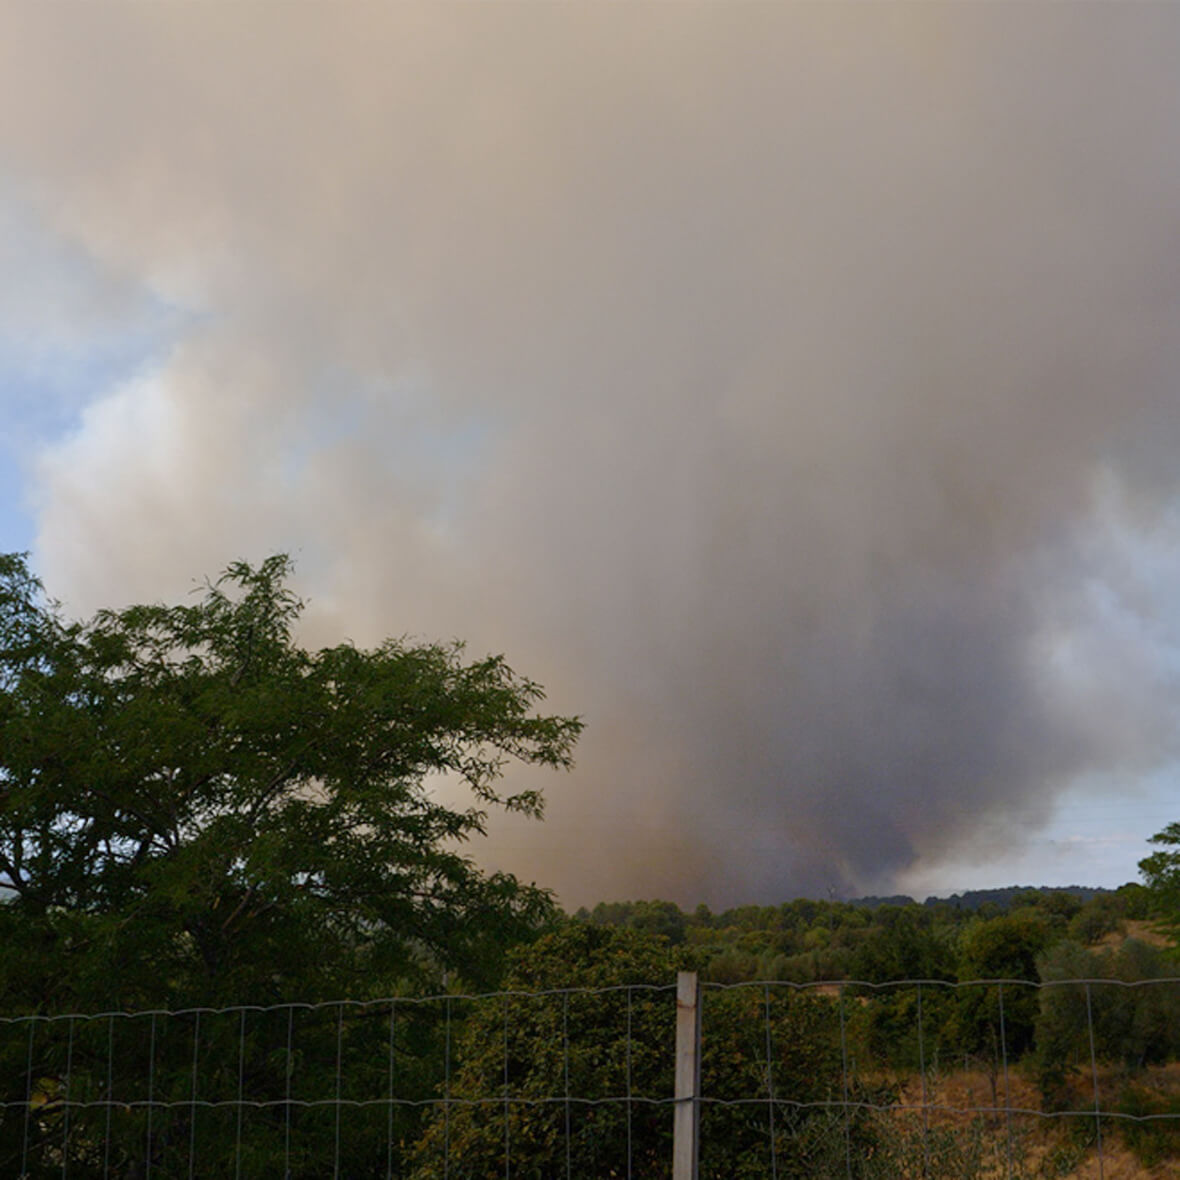 plume of smoke from the fire